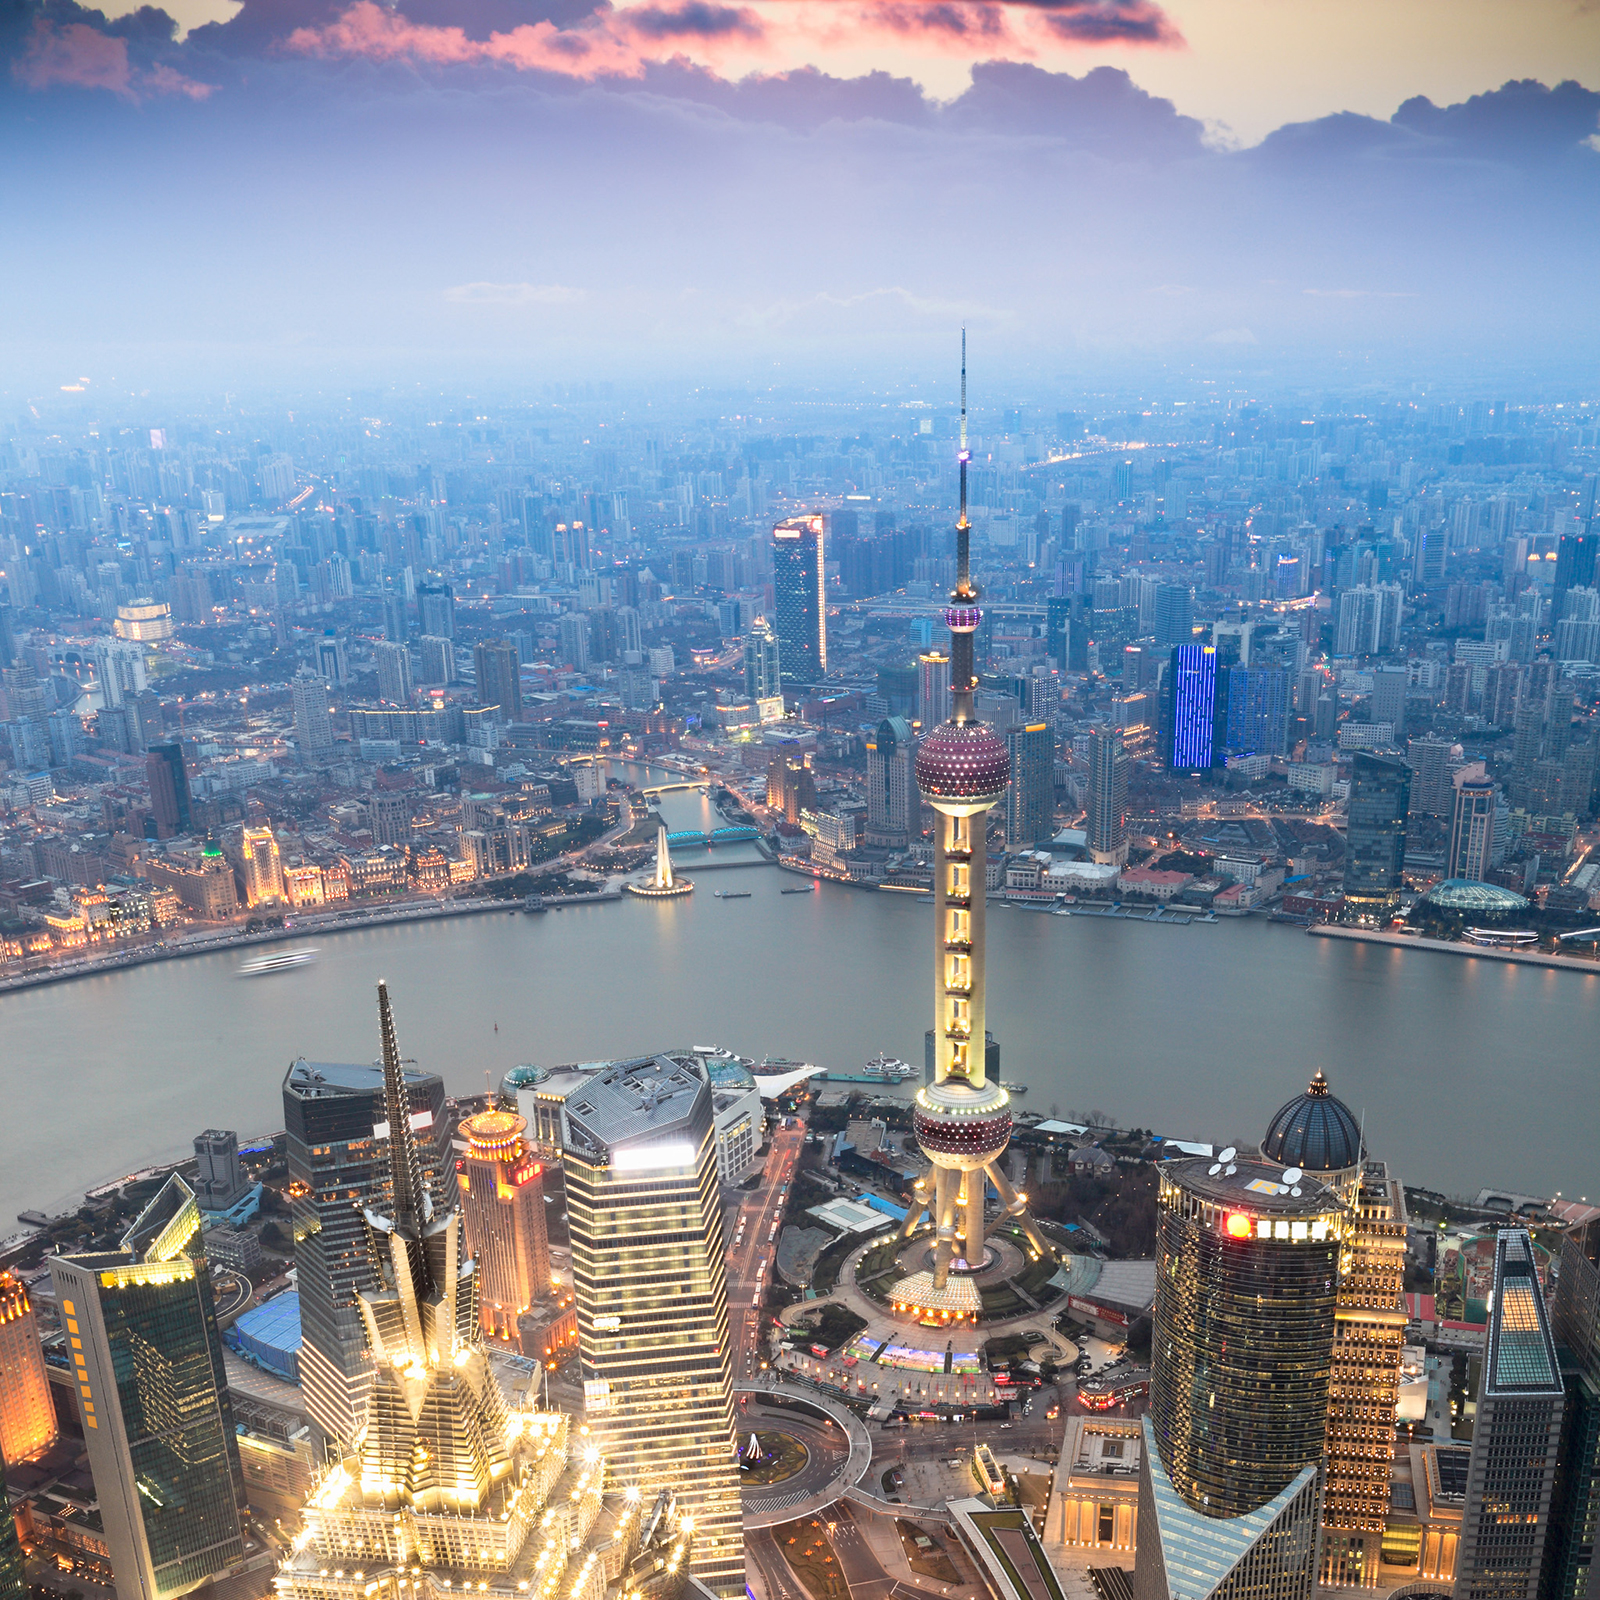 WORLD'S MOST POPULATED CITY- At a whopping 24,150,000 permanent inhabitants, Shanghai is the single city that is home to the most people in the world.